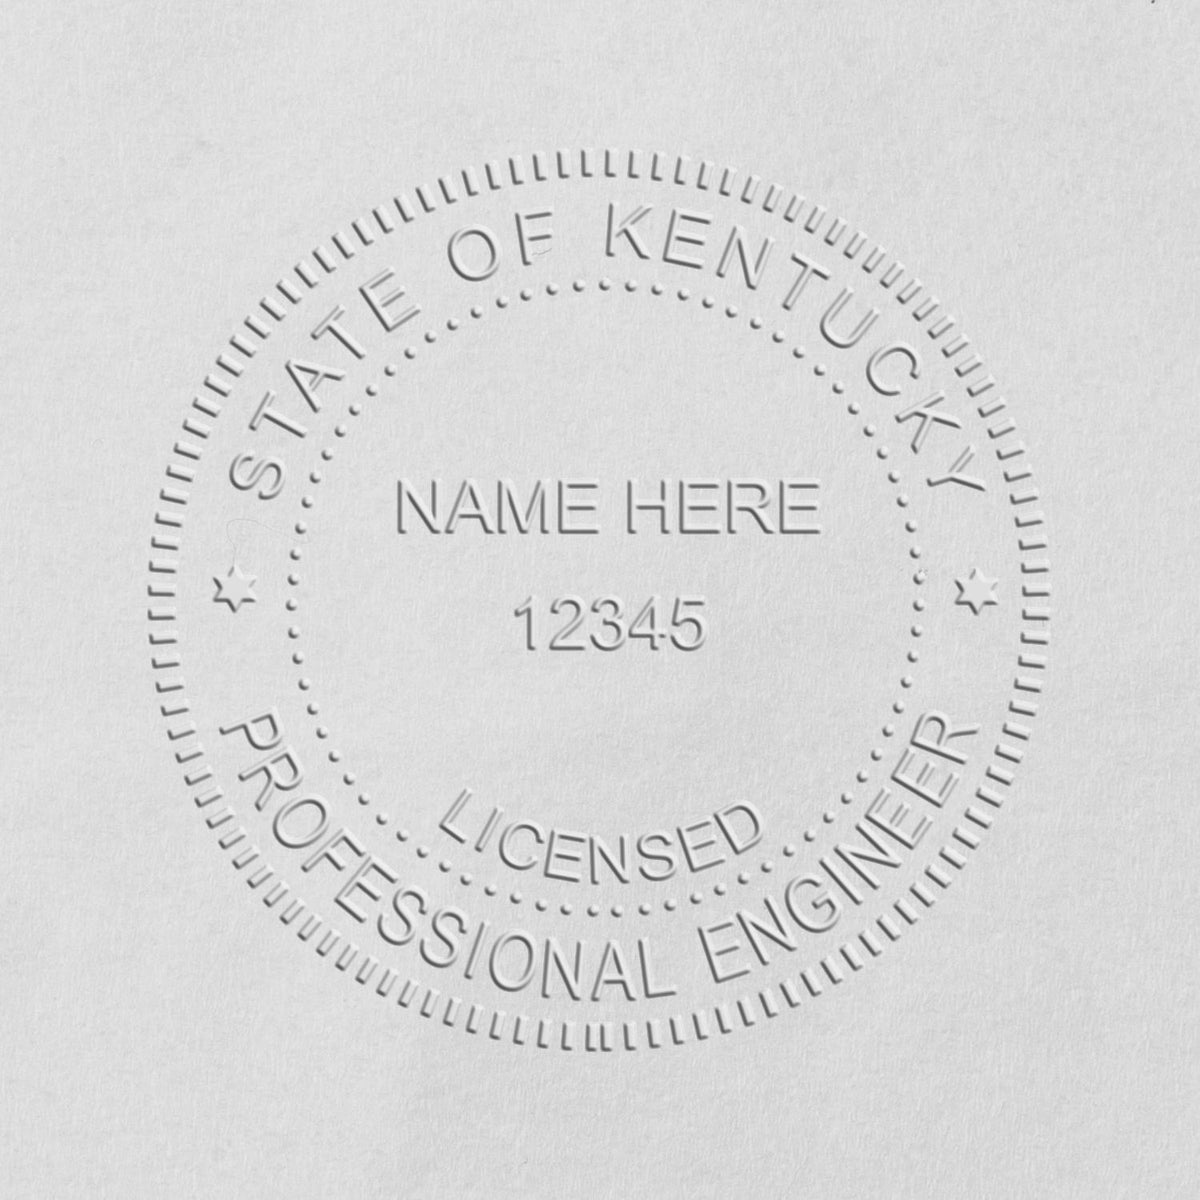 A stamped impression of the Handheld Kentucky Professional Engineer Embosser in this stylish lifestyle photo, setting the tone for a unique and personalized product.